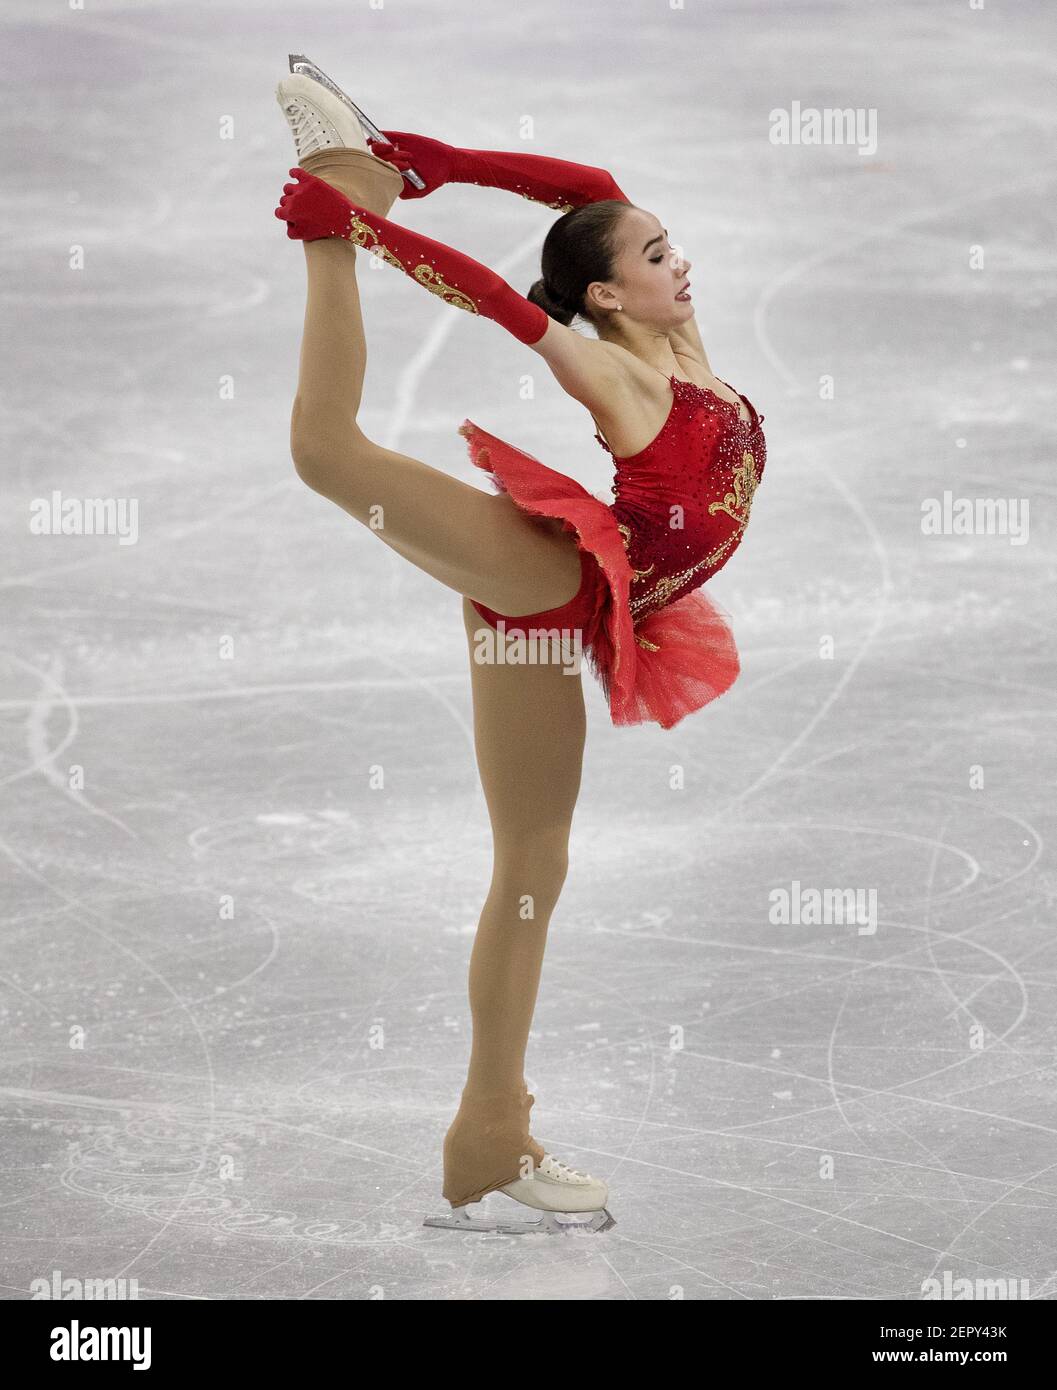 Alina Zagitova, Olympic Athlete from Russia, during her gold-medal winning program at Gangneung Ice Arena on Friday, Feb. 23, 2018, at the Pyeongchang Winter Olympics. (Photo by Carlos Gonzalez/Minneapolis Star Tribune/TNS/Sipa USA) Stock Photo